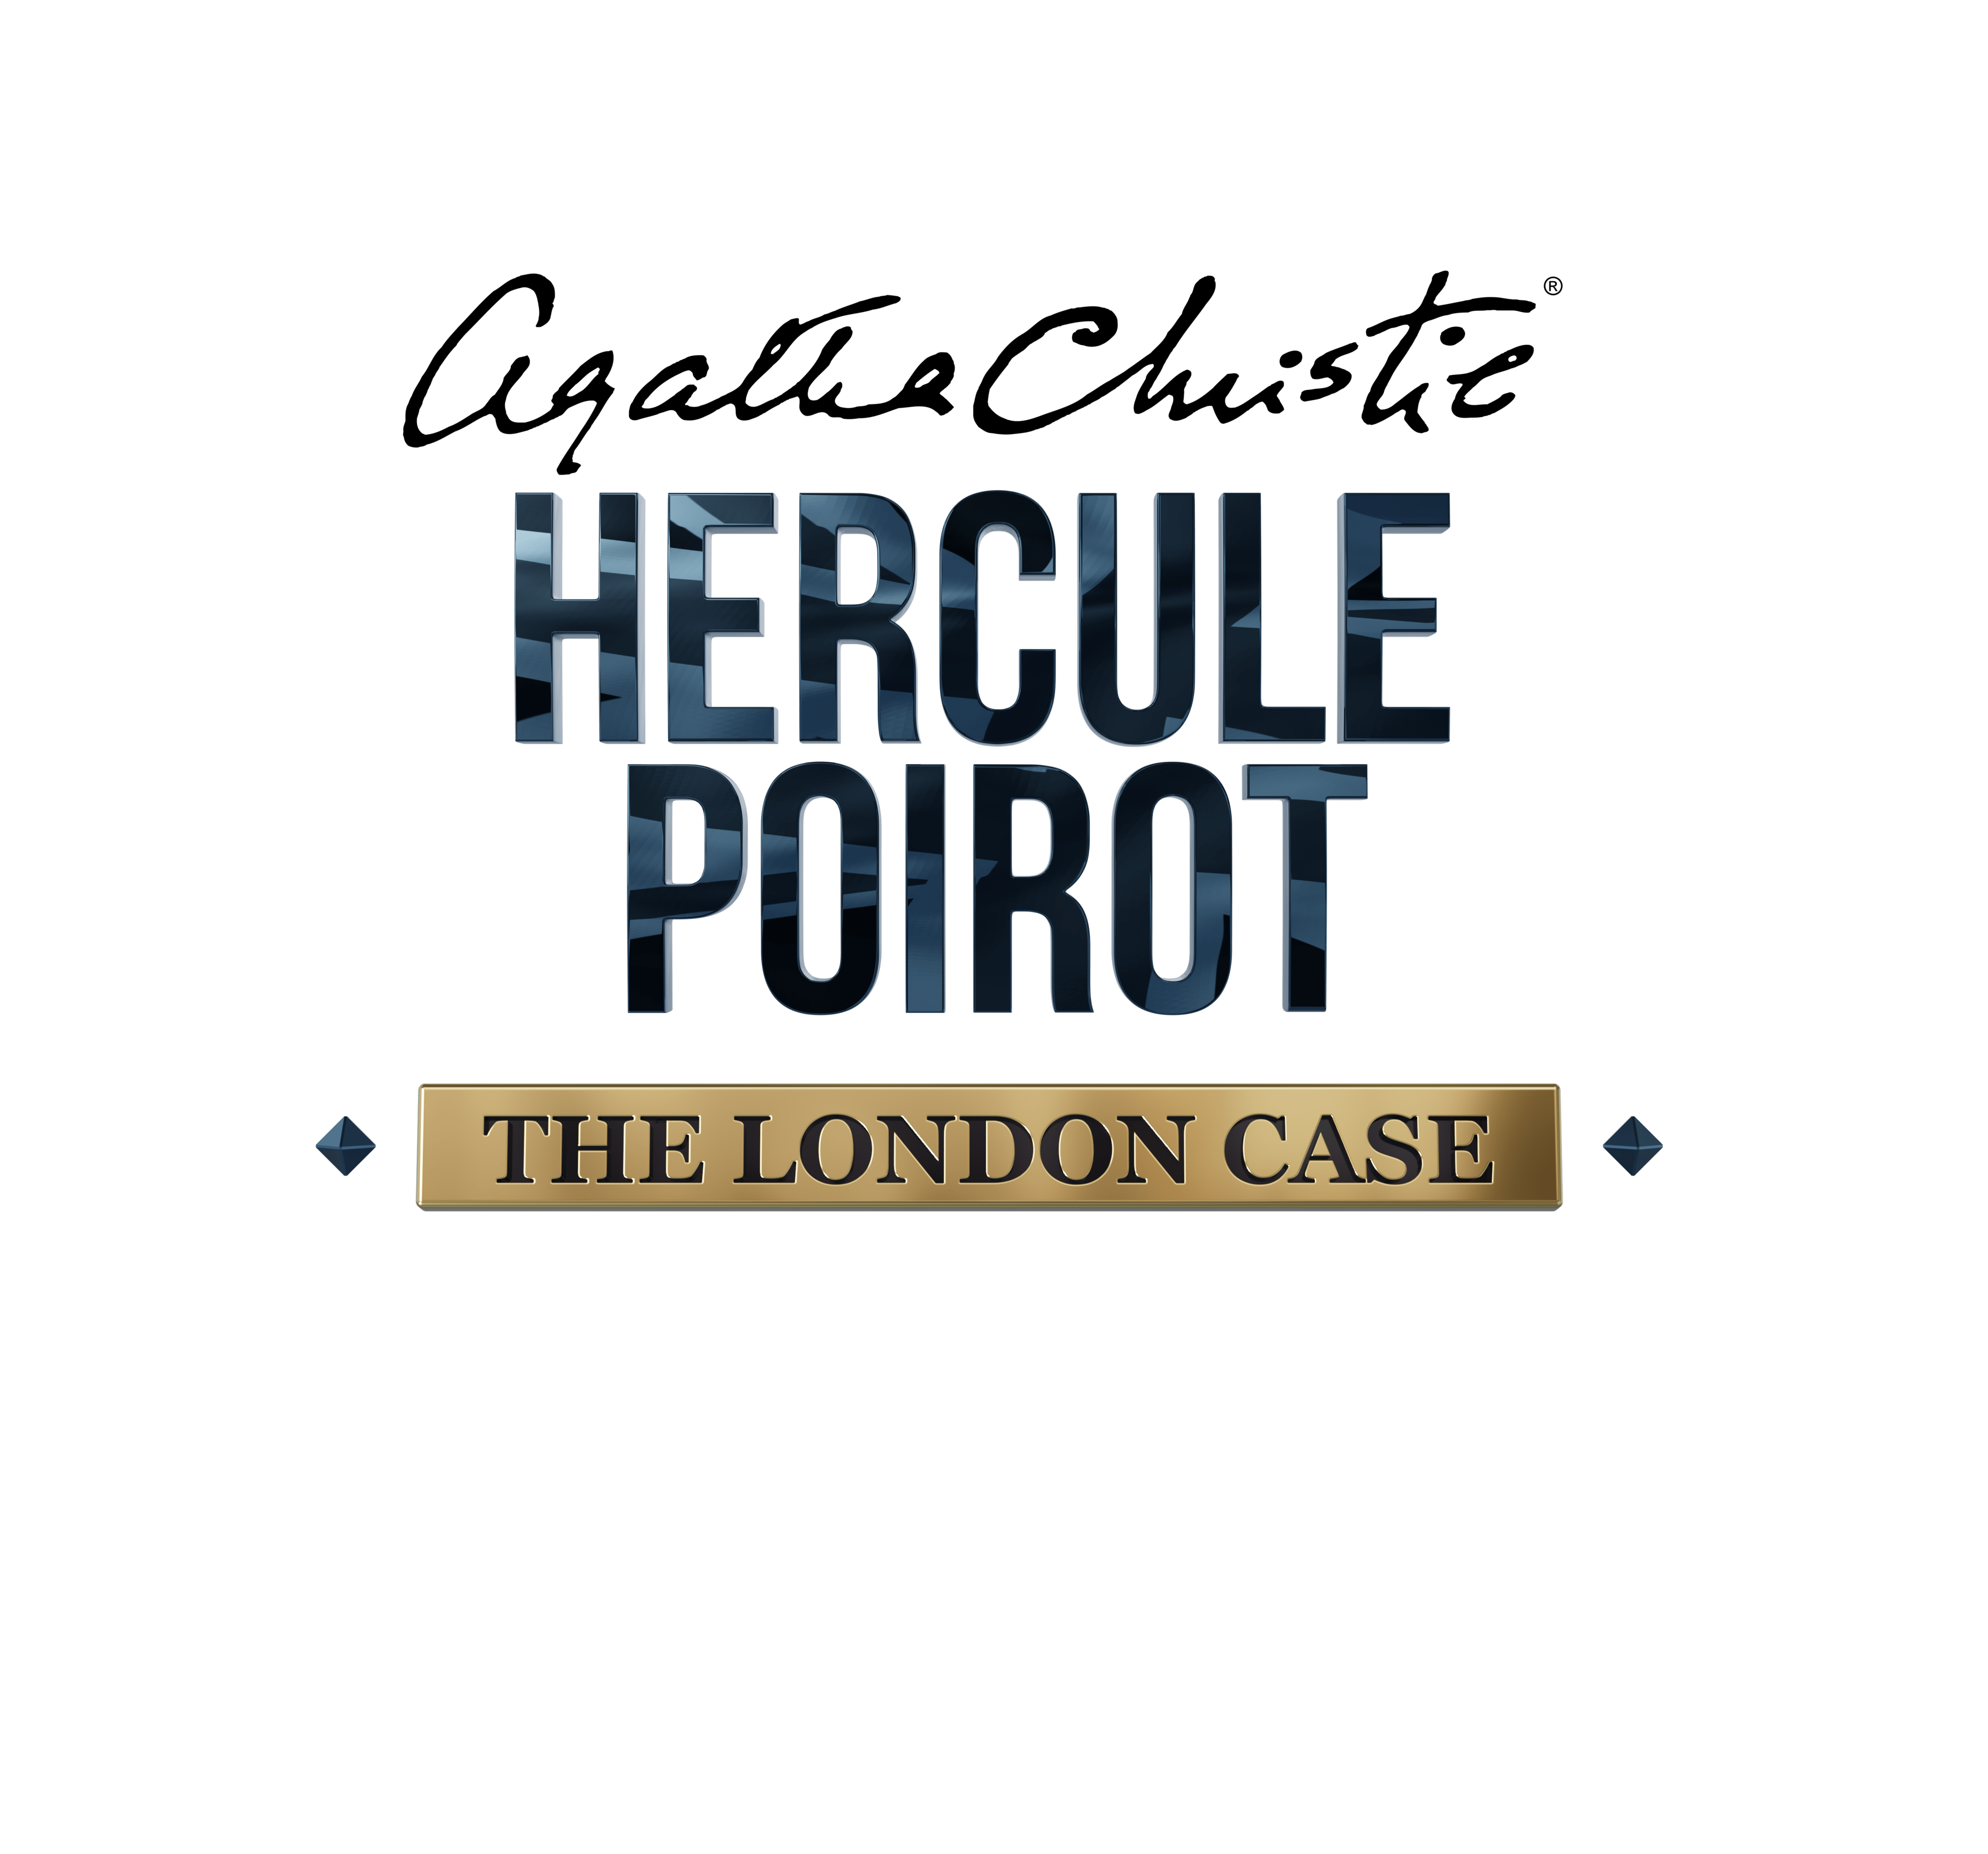 Agatha Christie - Hercule Poirot: The London Case announced for PS5, Xbox  Series, PS4, Xbox One, Switch, and PC - Gematsu | PS5-Spiele